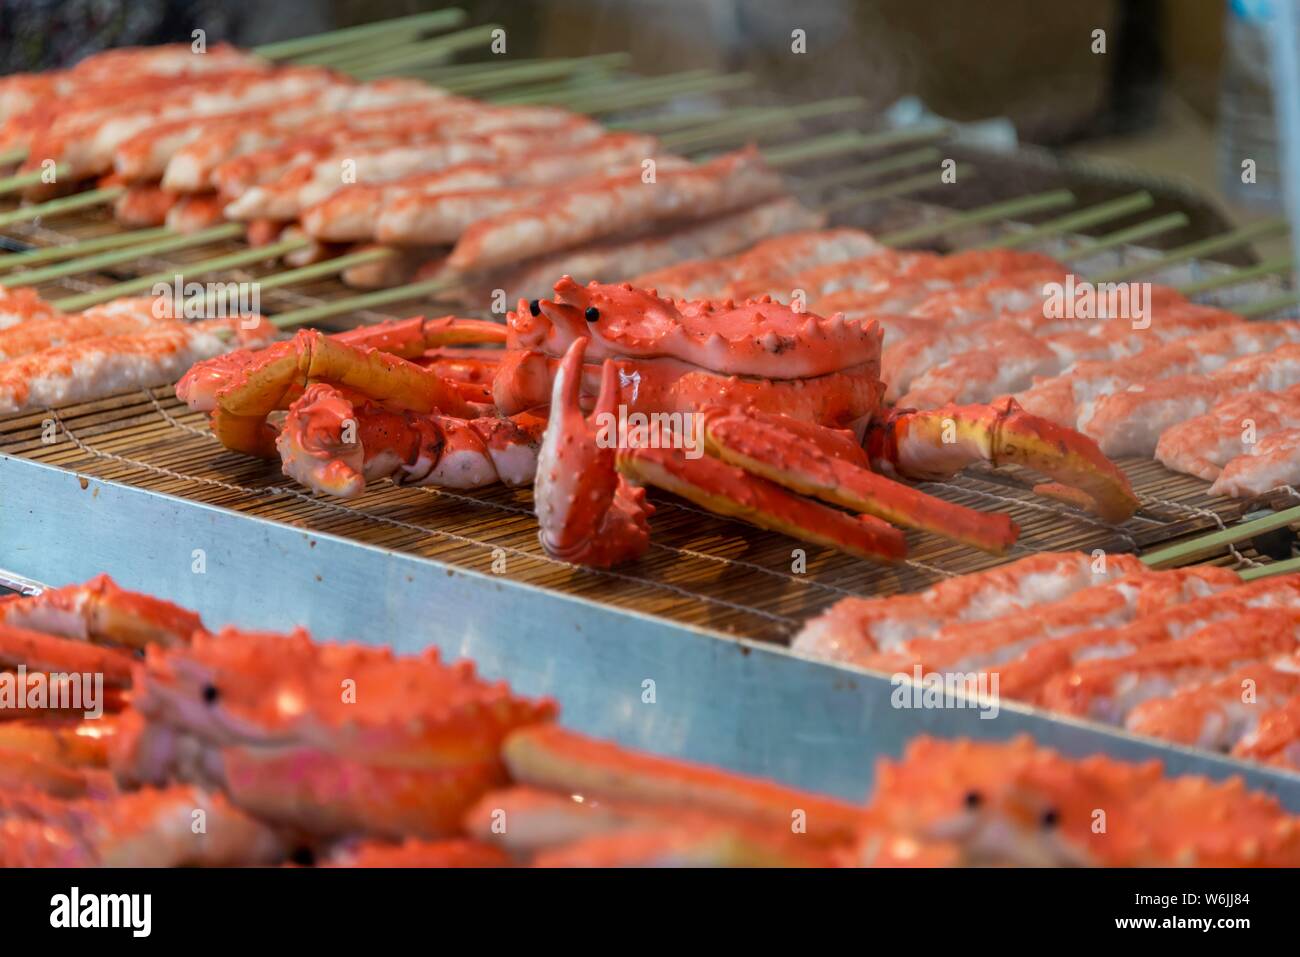 Grilled crabs at a food stand, Hanami Fest, Ueno Park, Tokyo, Japan Stock Photo